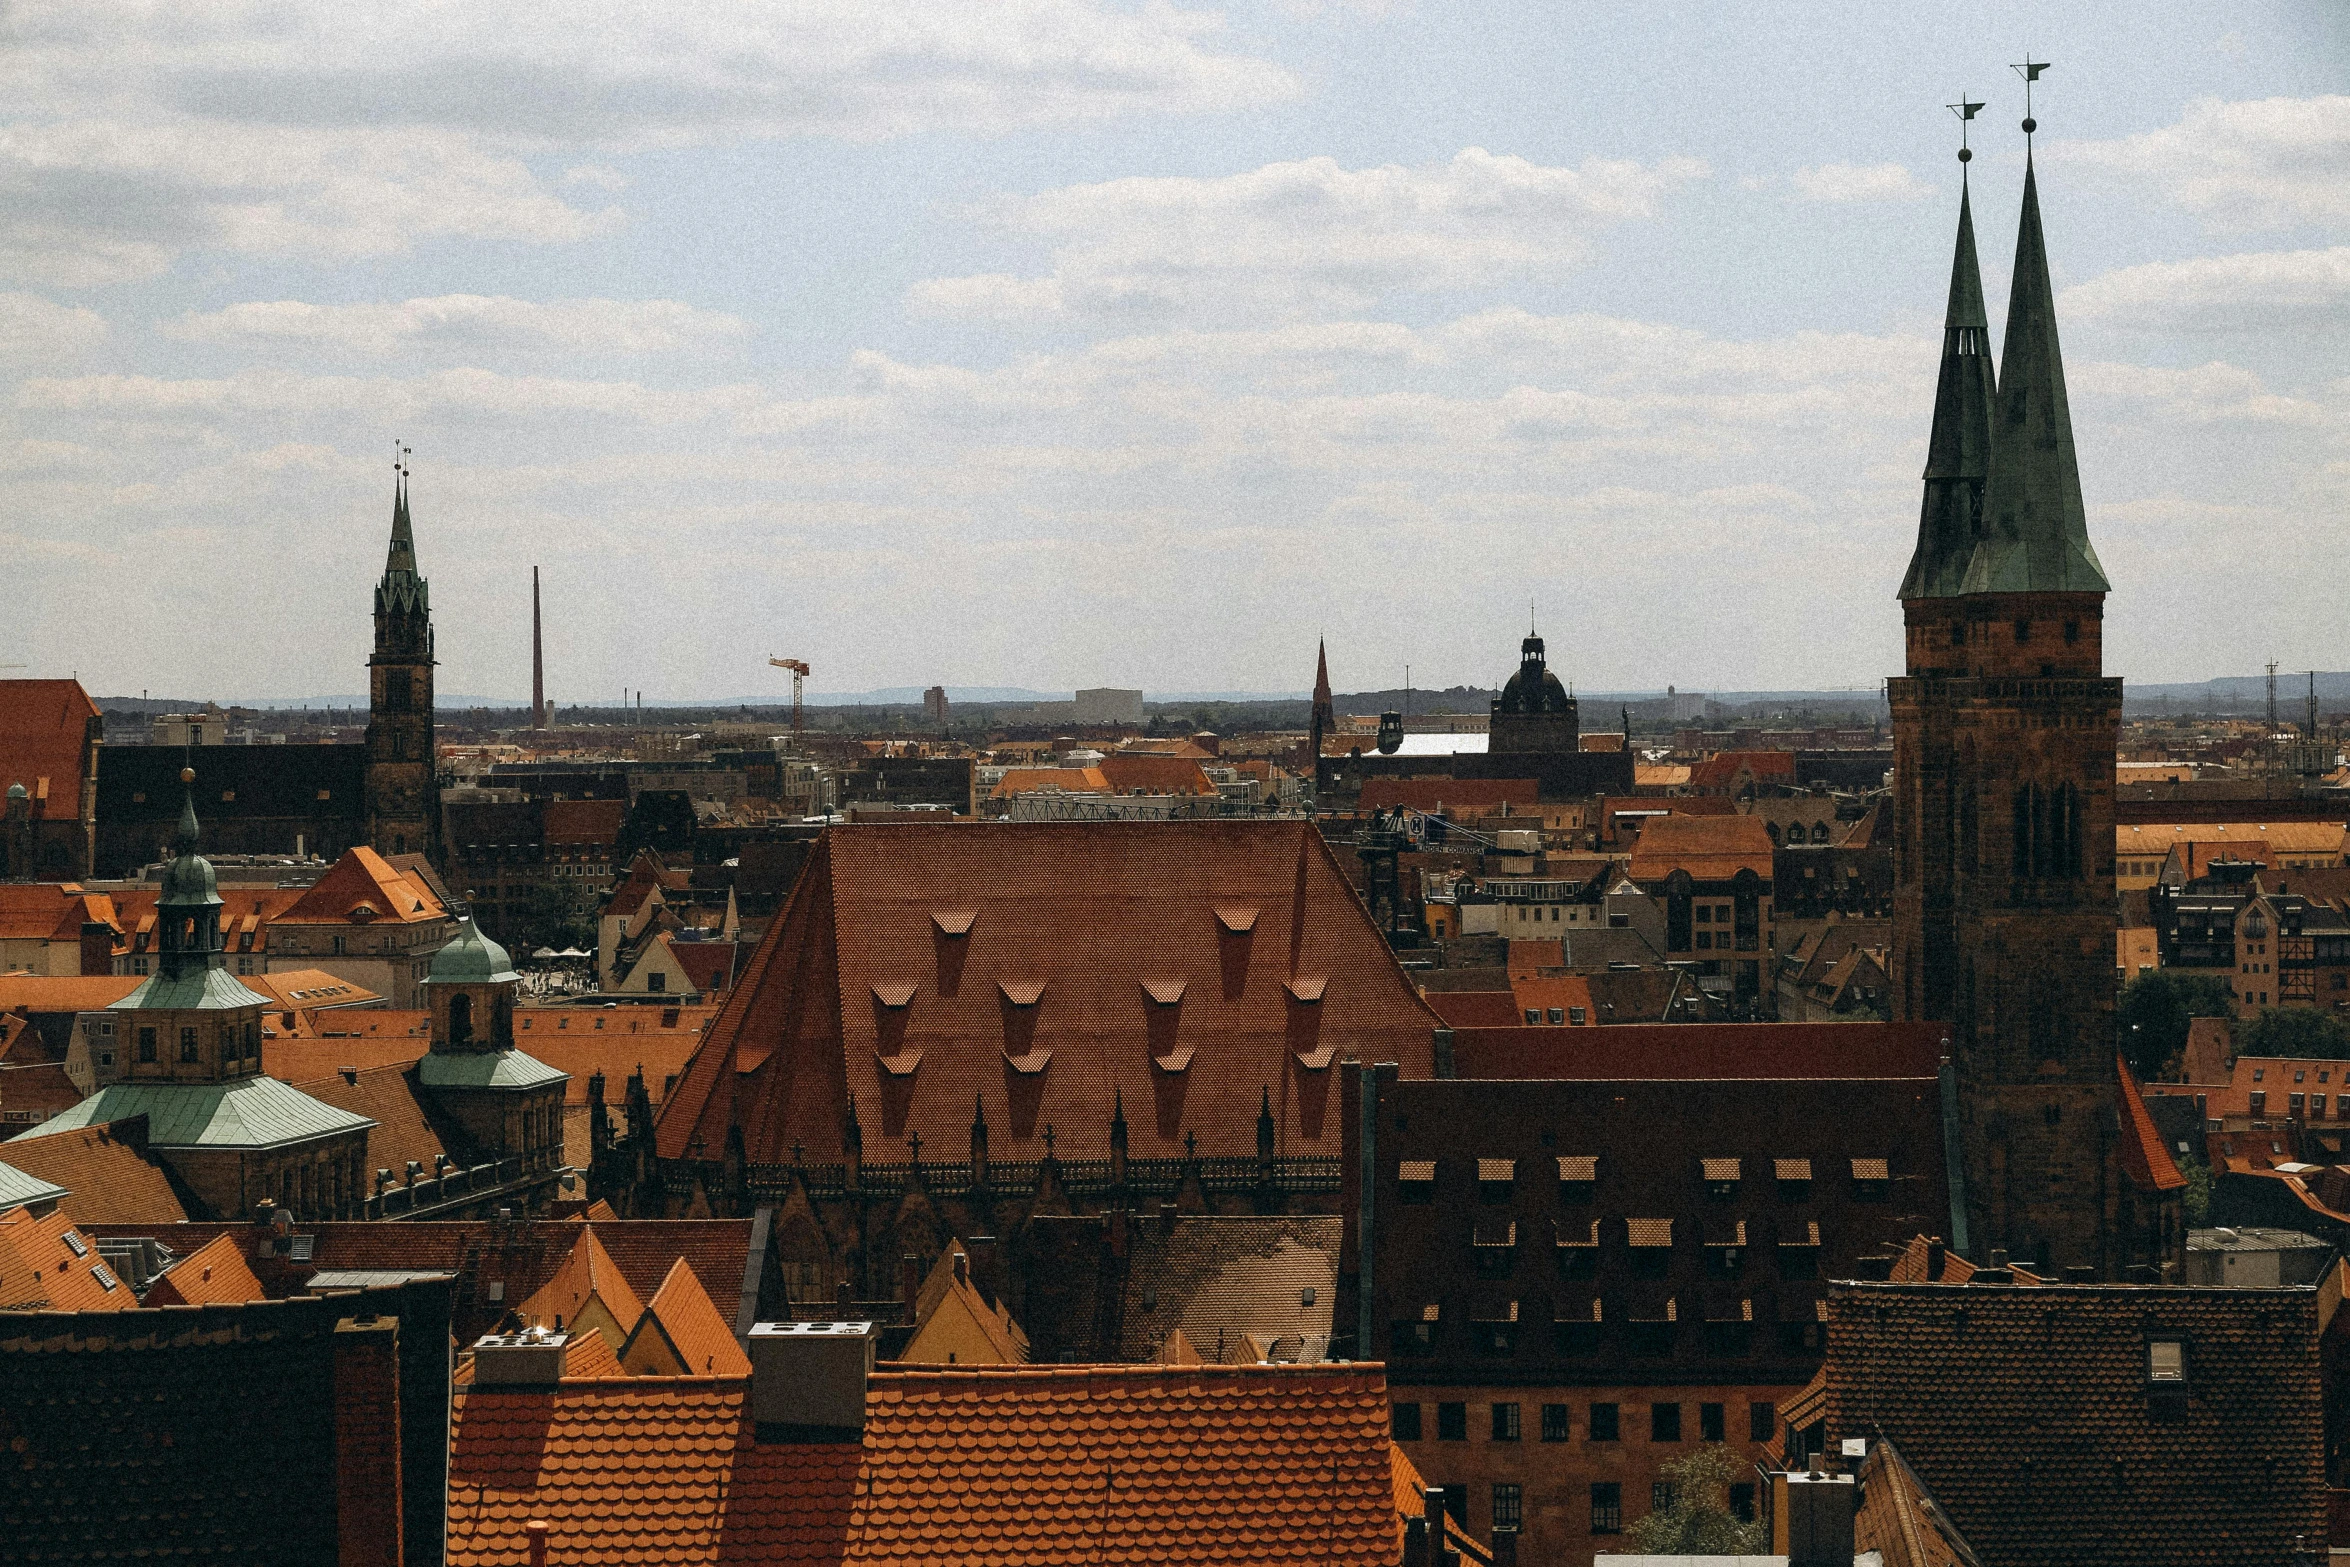 a po taken from a building top in europe looking at a city with tall spires